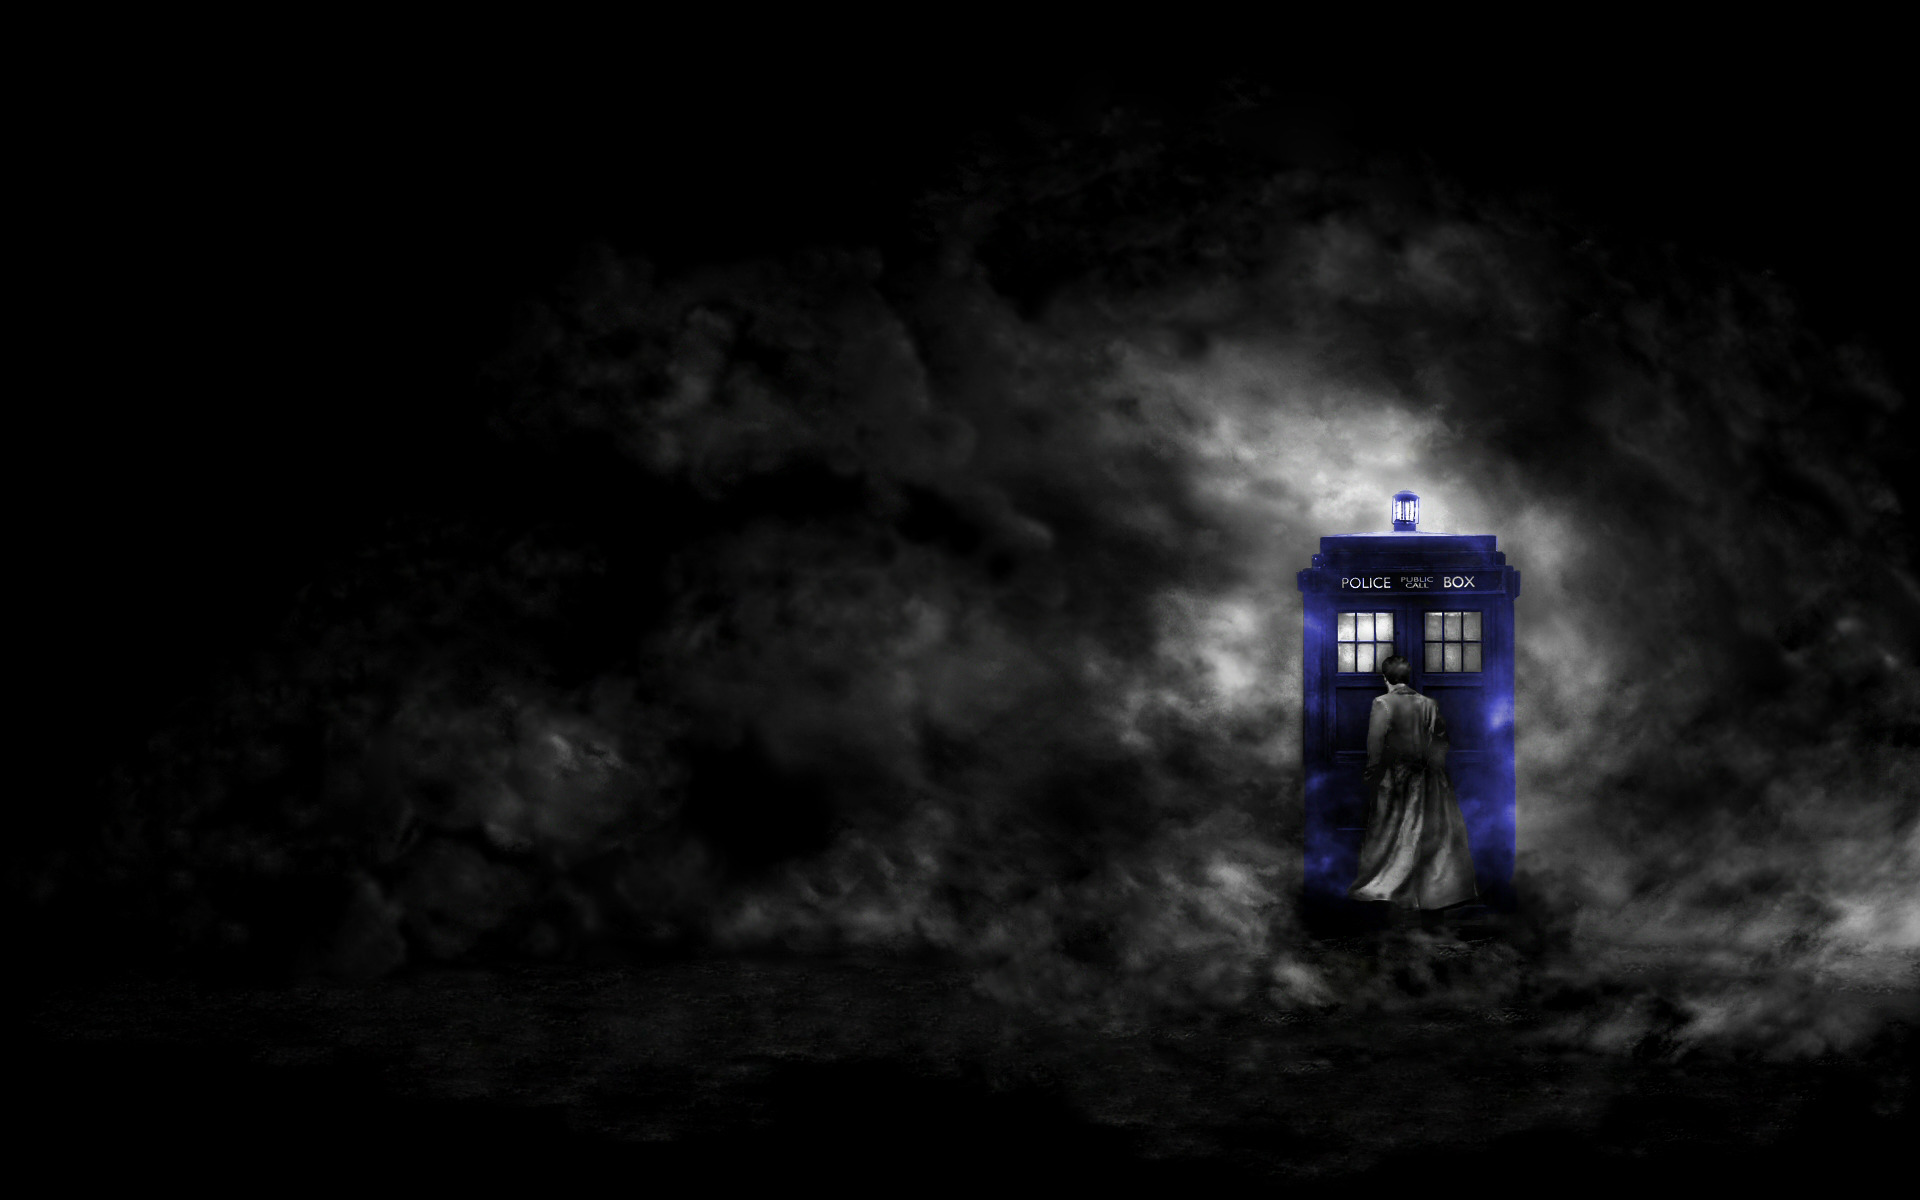 Doctor who wallpapers HD A5 - Doctor who backgrounds | doctor who tardis wallpapers | Dr Who | Doctor who desktop wallpapers | doctor who phone wallpapers.